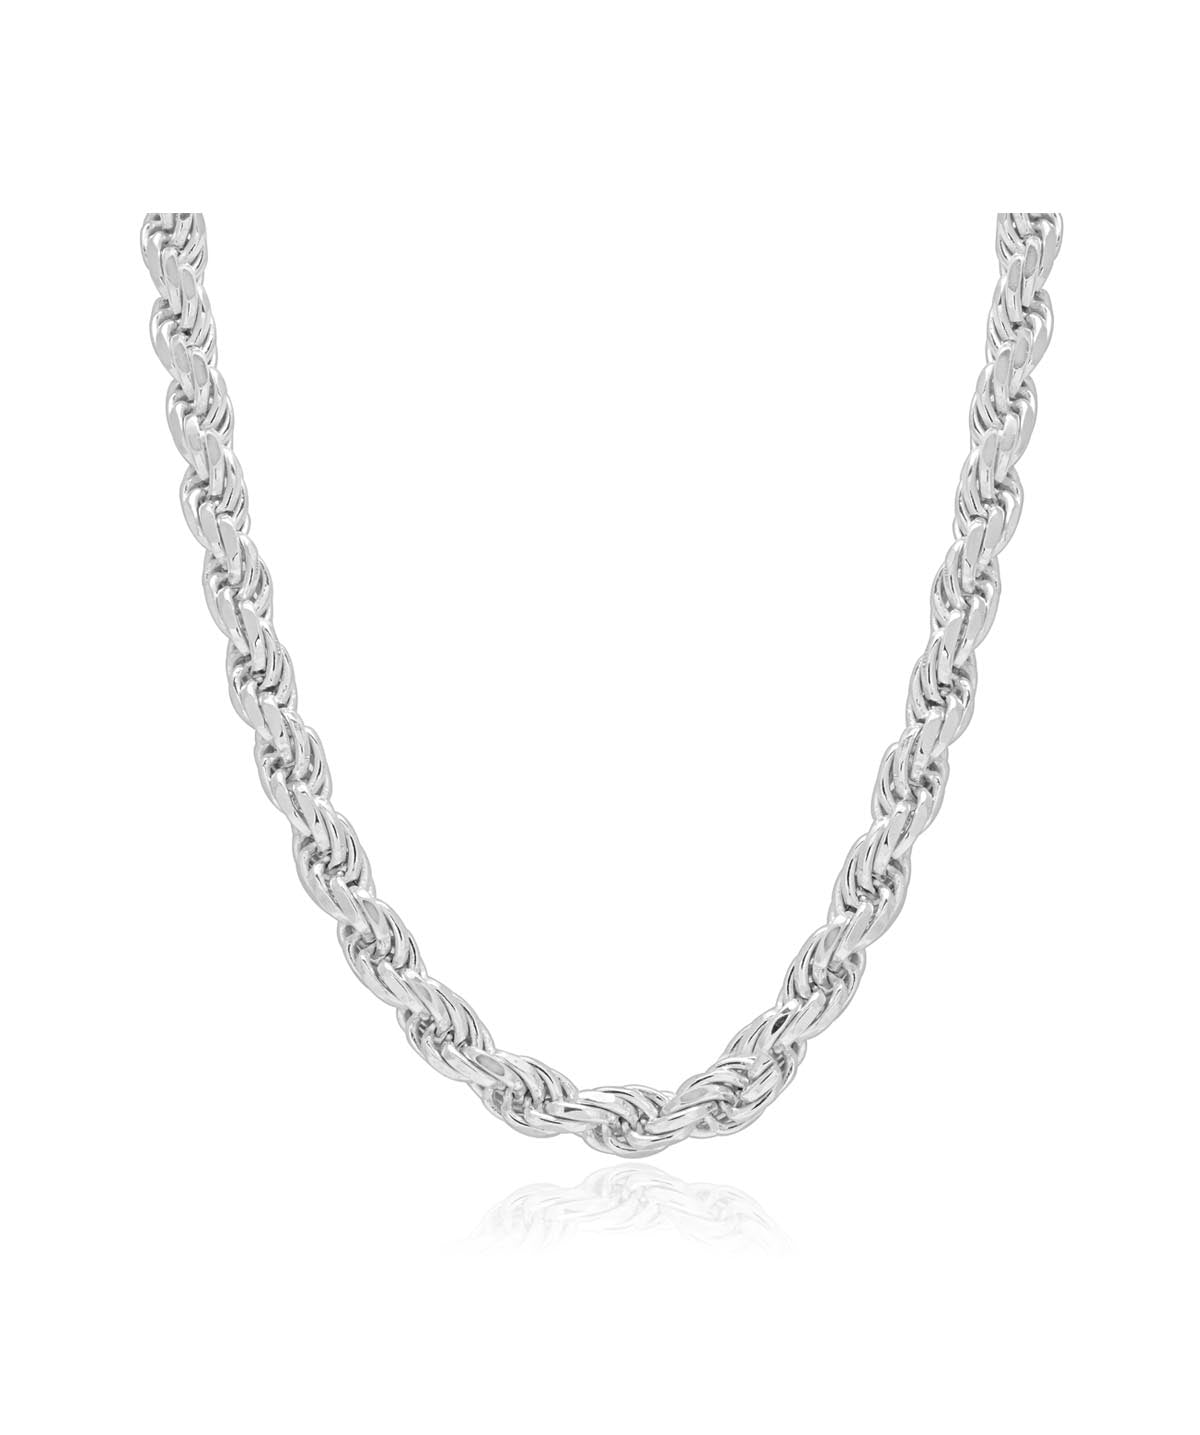 925 Sterling Silver Rhodium Plated 5.8mm Rope Chain 24"